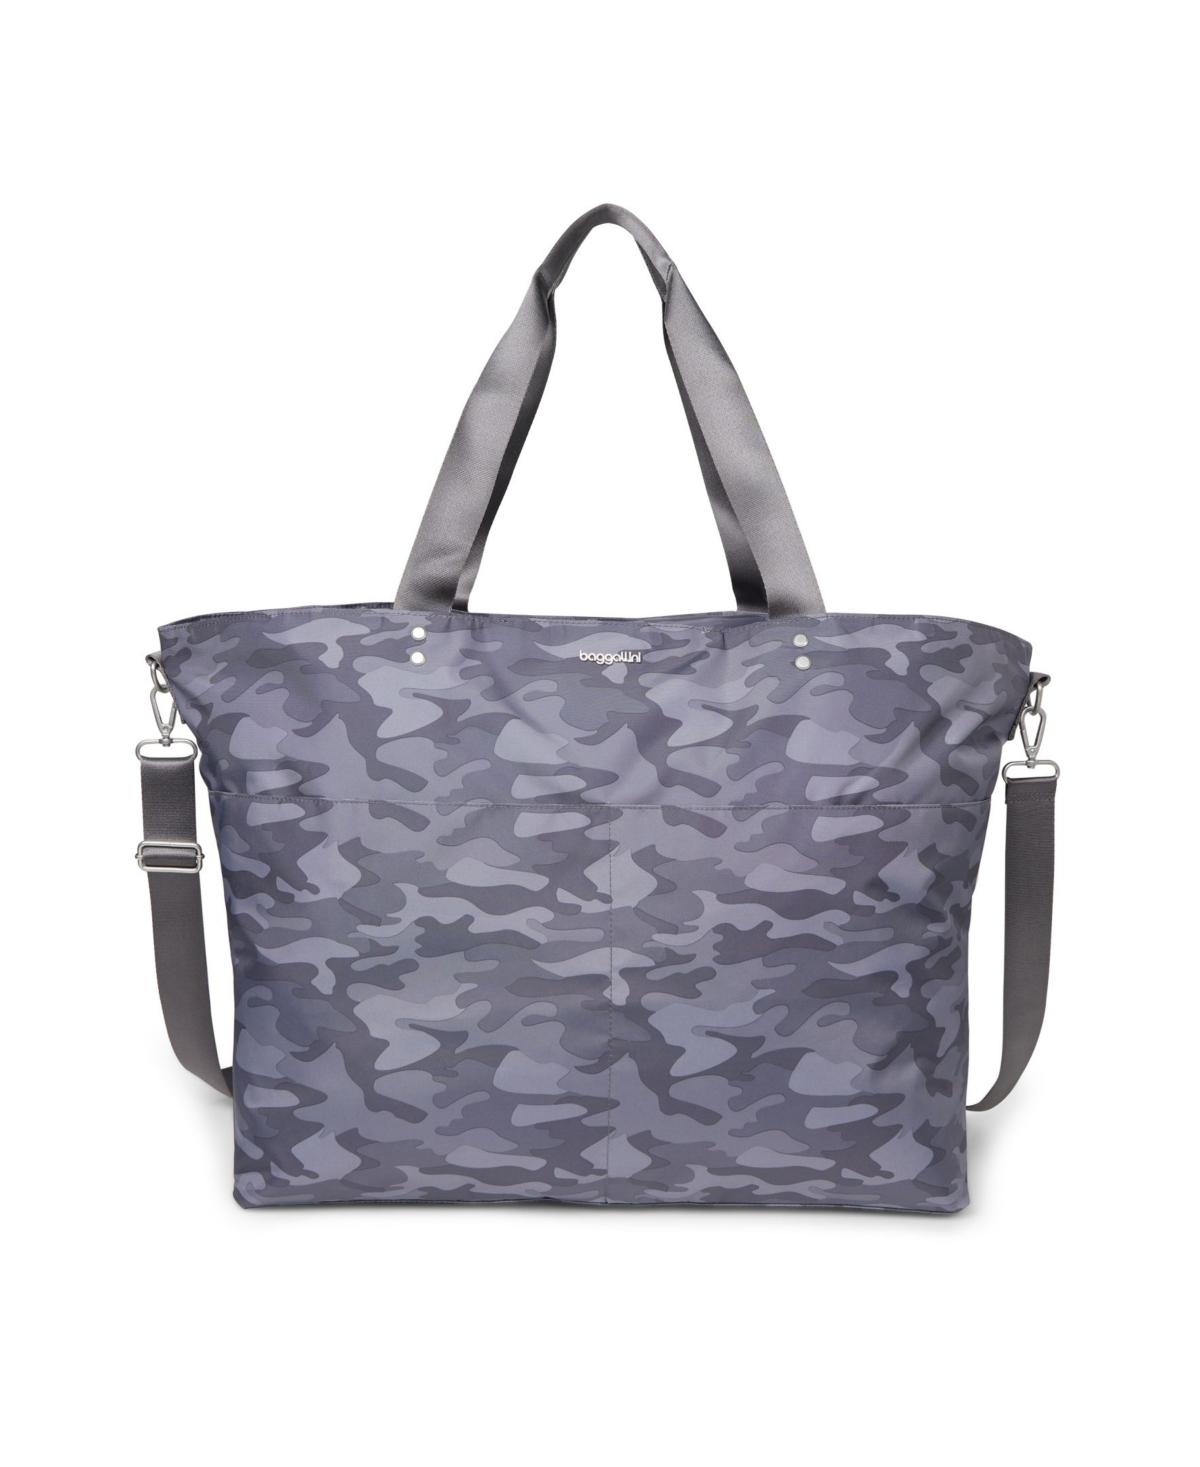 Baggallini Extra-Large Carryall Tote